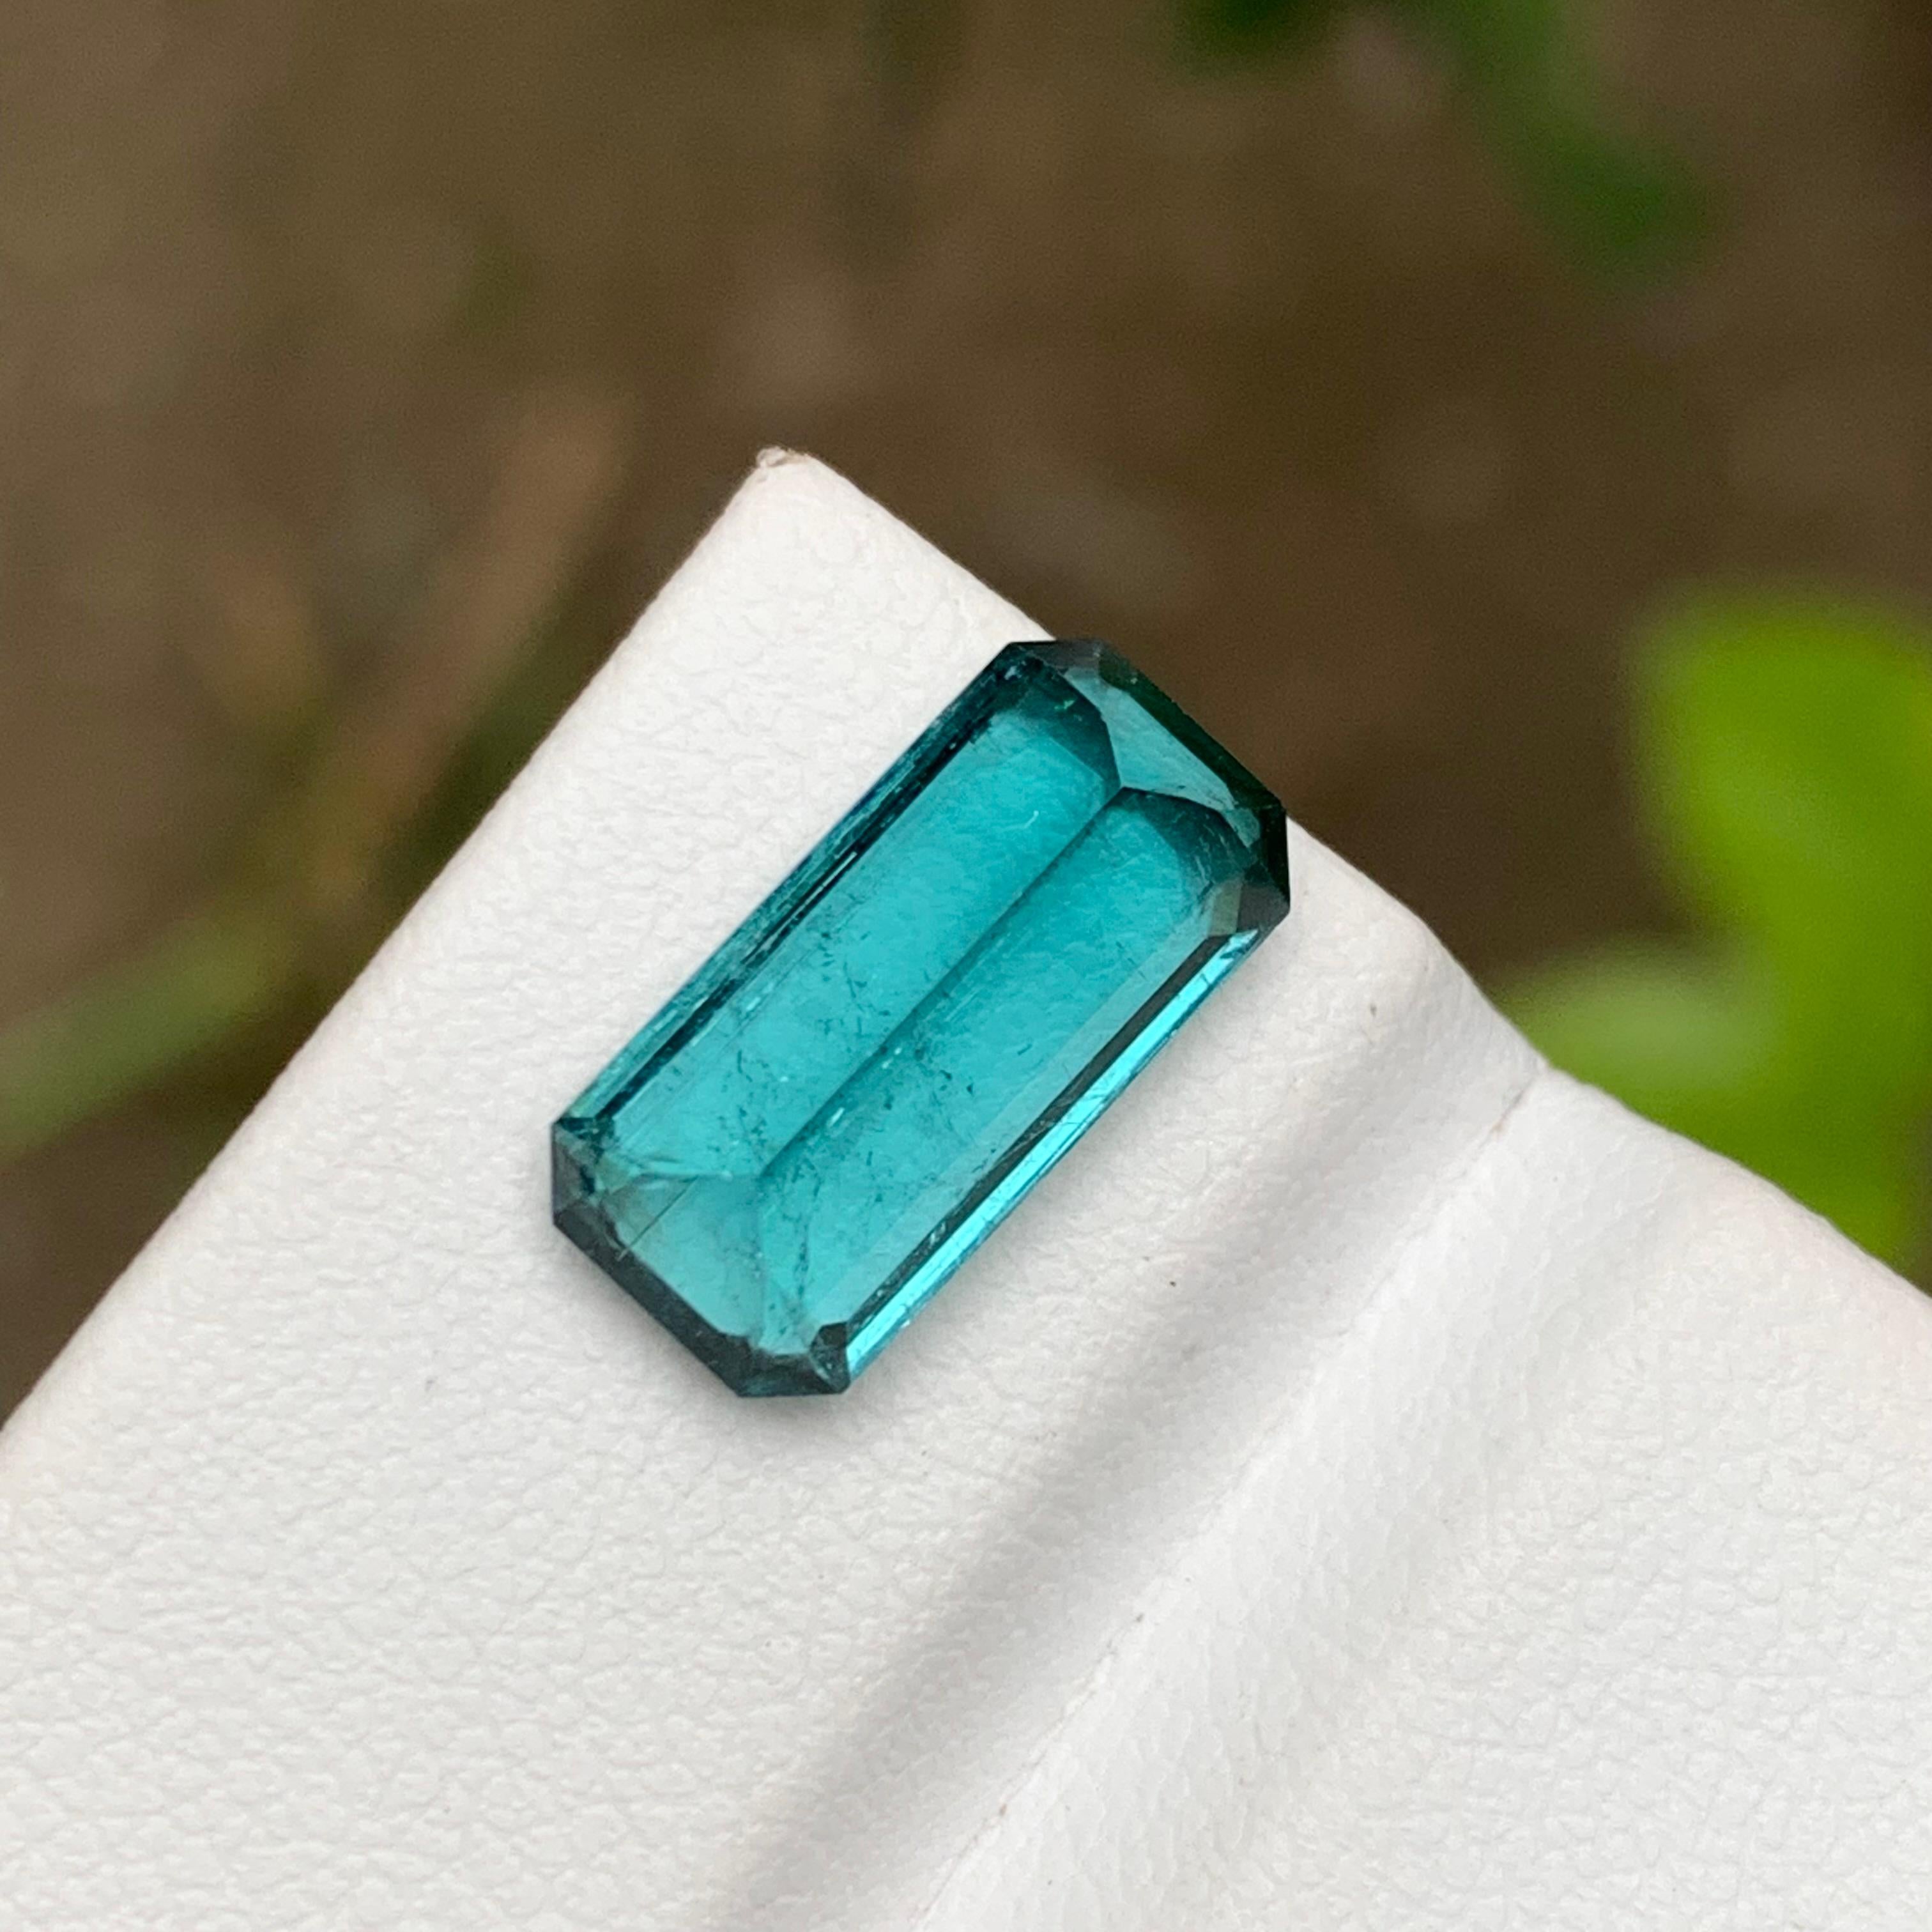 Contemporary Rare Neon Blue Natural Tourmaline Gemstone, 4 Ct Emerald Cut for Ring/Jewelry AF For Sale